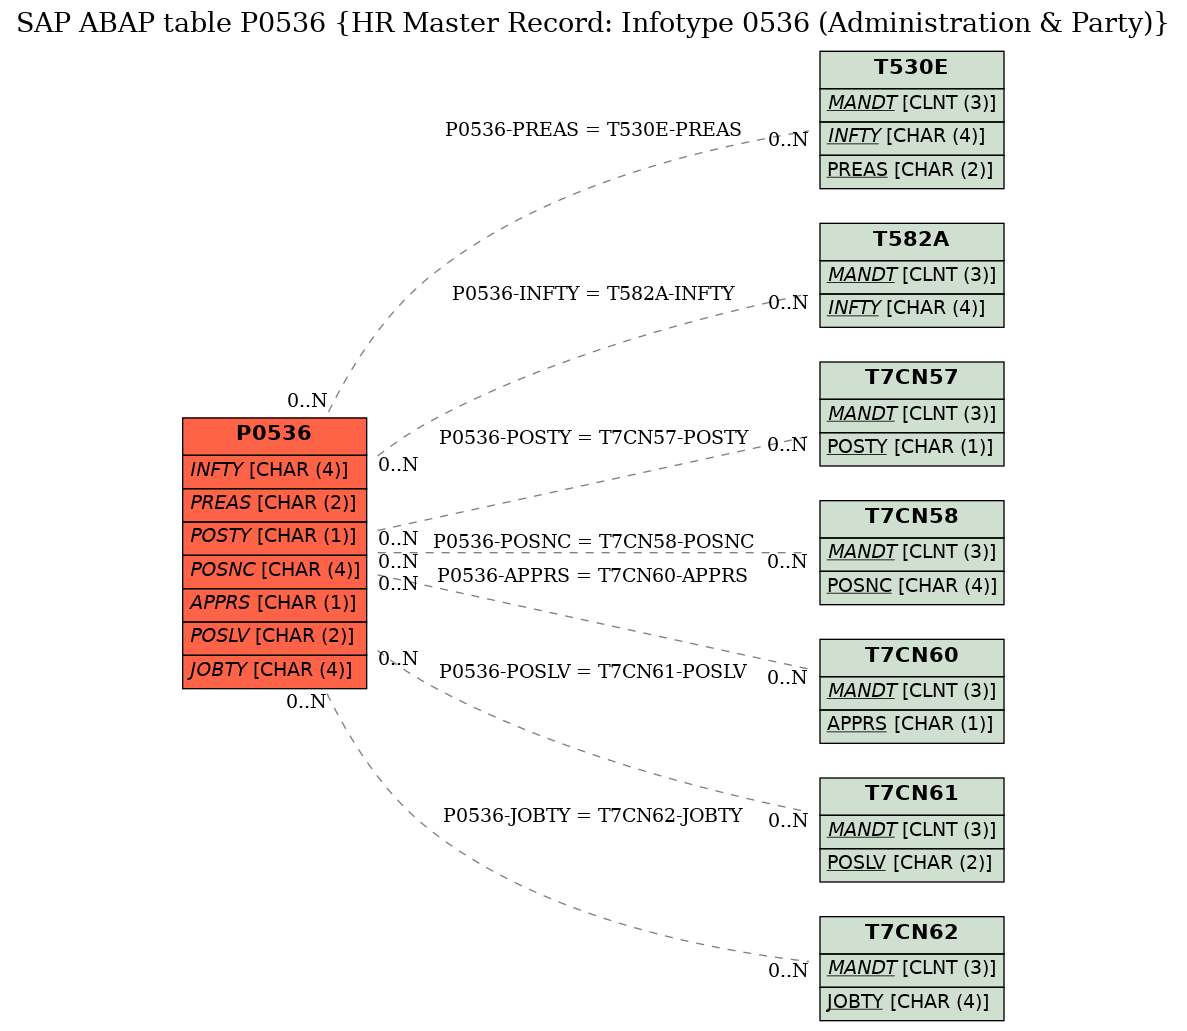 E-R Diagram for table P0536 (HR Master Record: Infotype 0536 (Administration & Party))